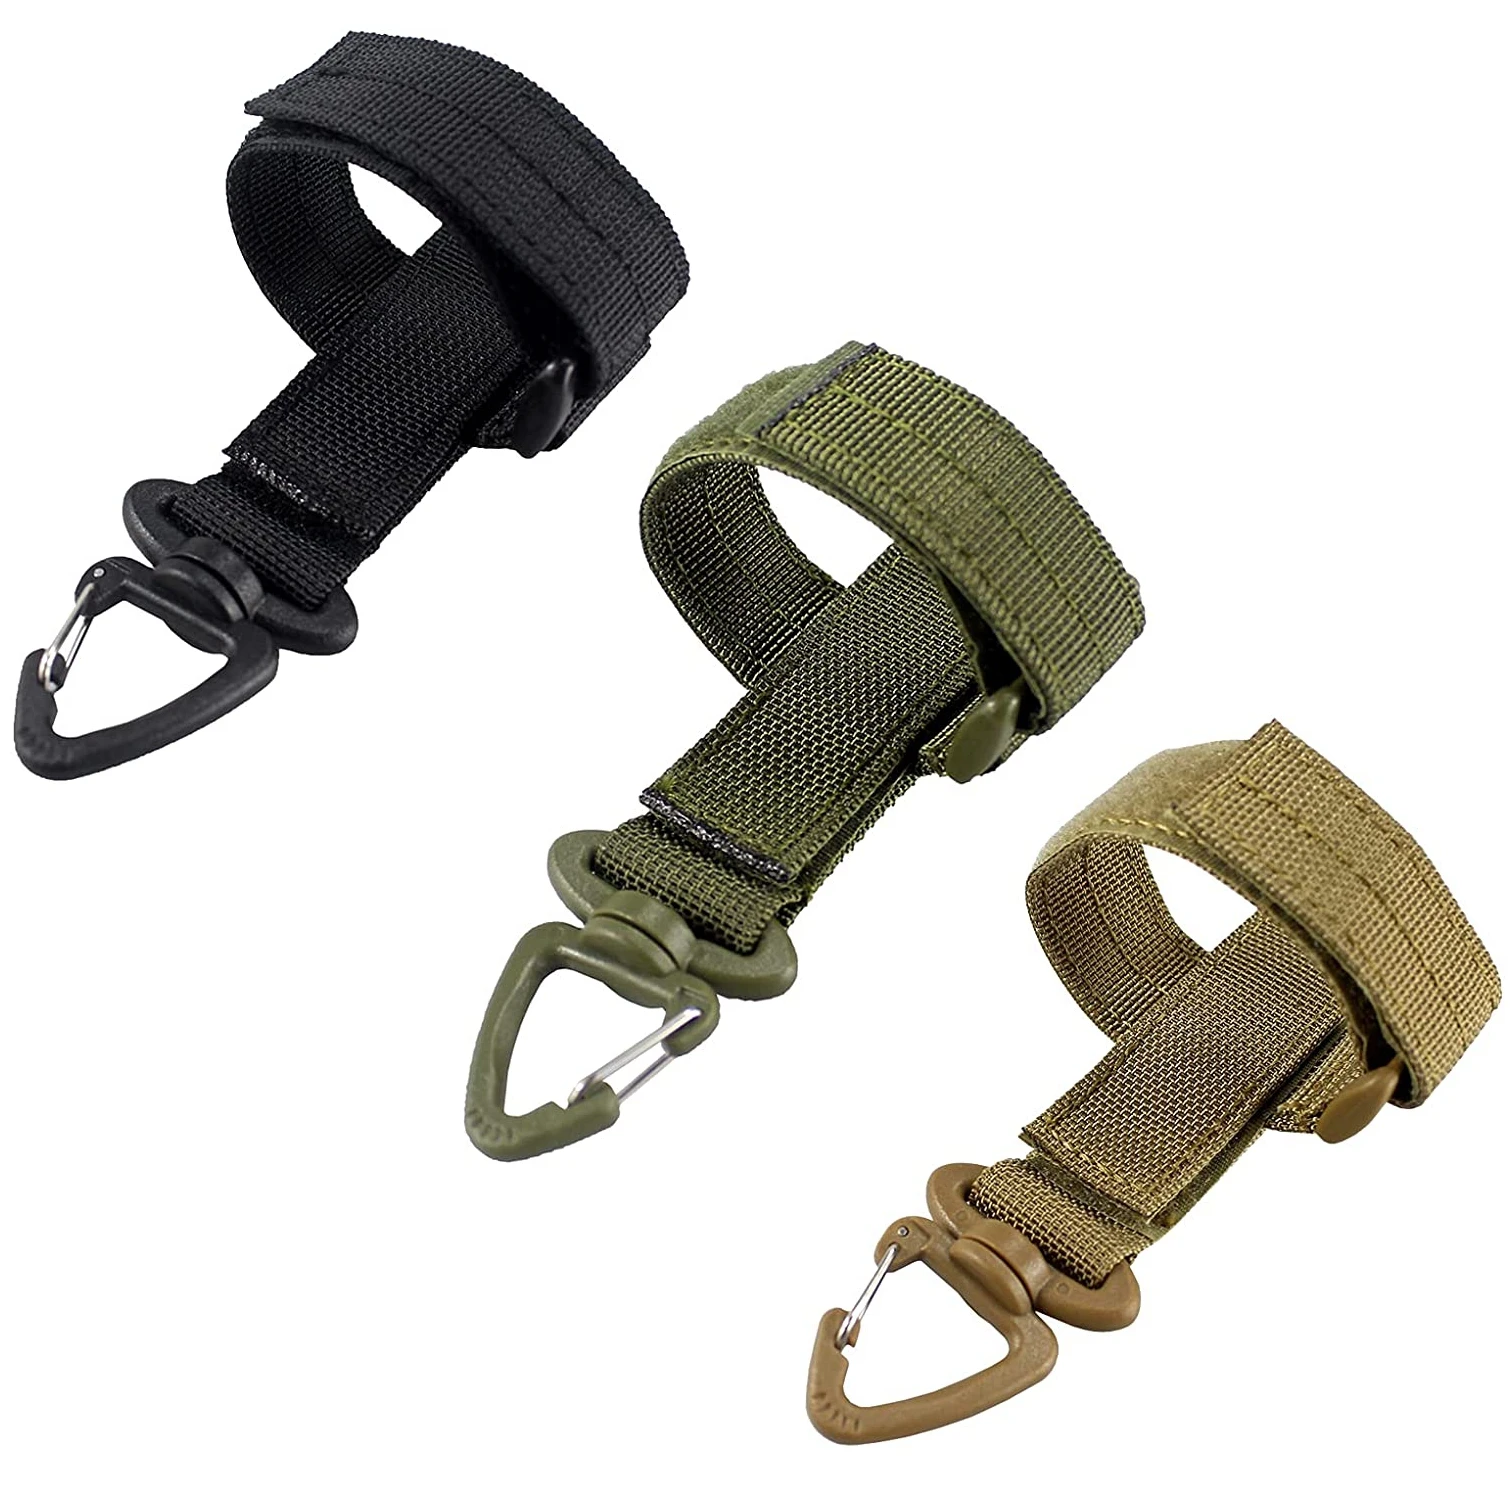 Details about   Tactical Gear Clip Band Carabiner Keychain Molle Key Ring for Outdoor Hiking 